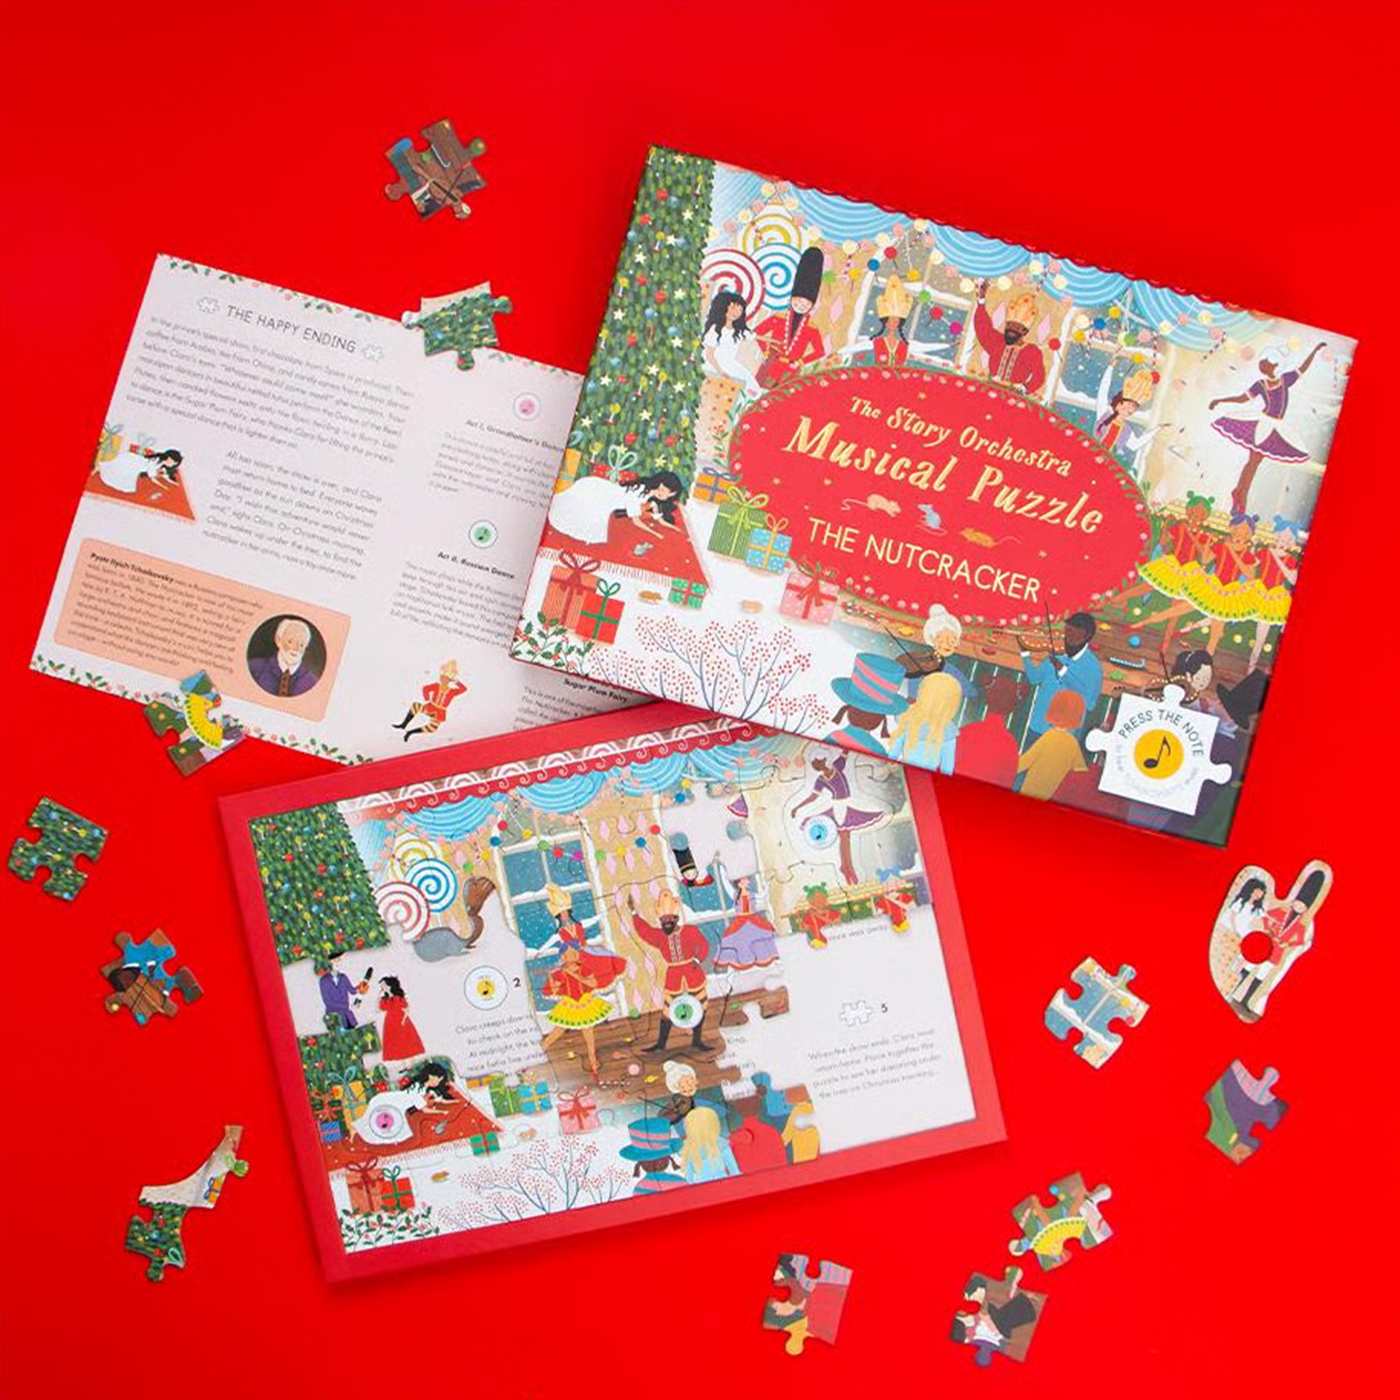 FRANCES LINCOLN Musical Puzzle - The Story Orchestra Nutcracker